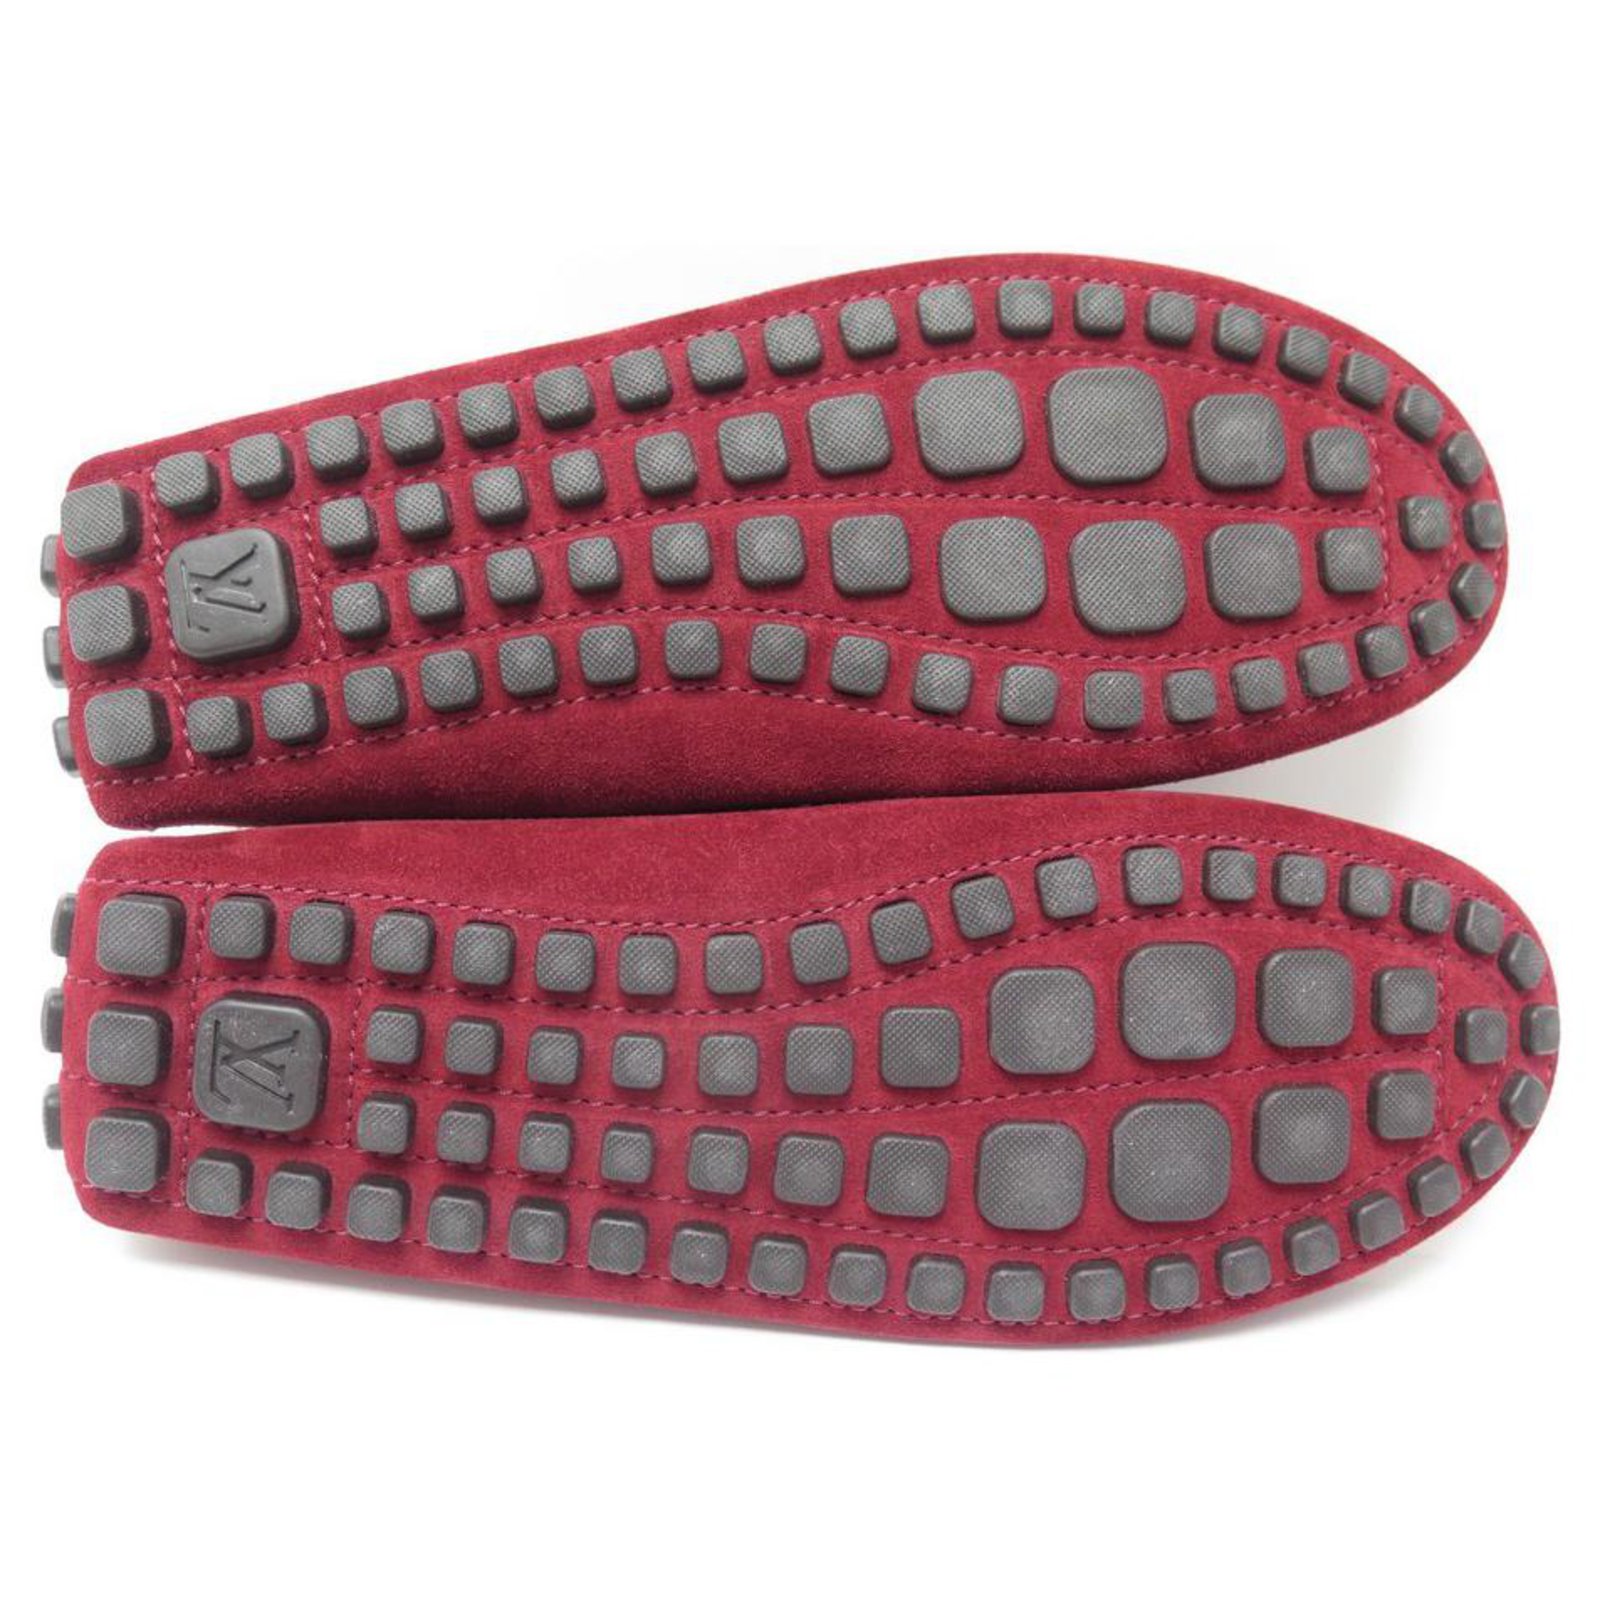 NEW LOUIS VUITTON MOCCASINS ARIZONA SHOES 7.5 41.5 RED SUEDE